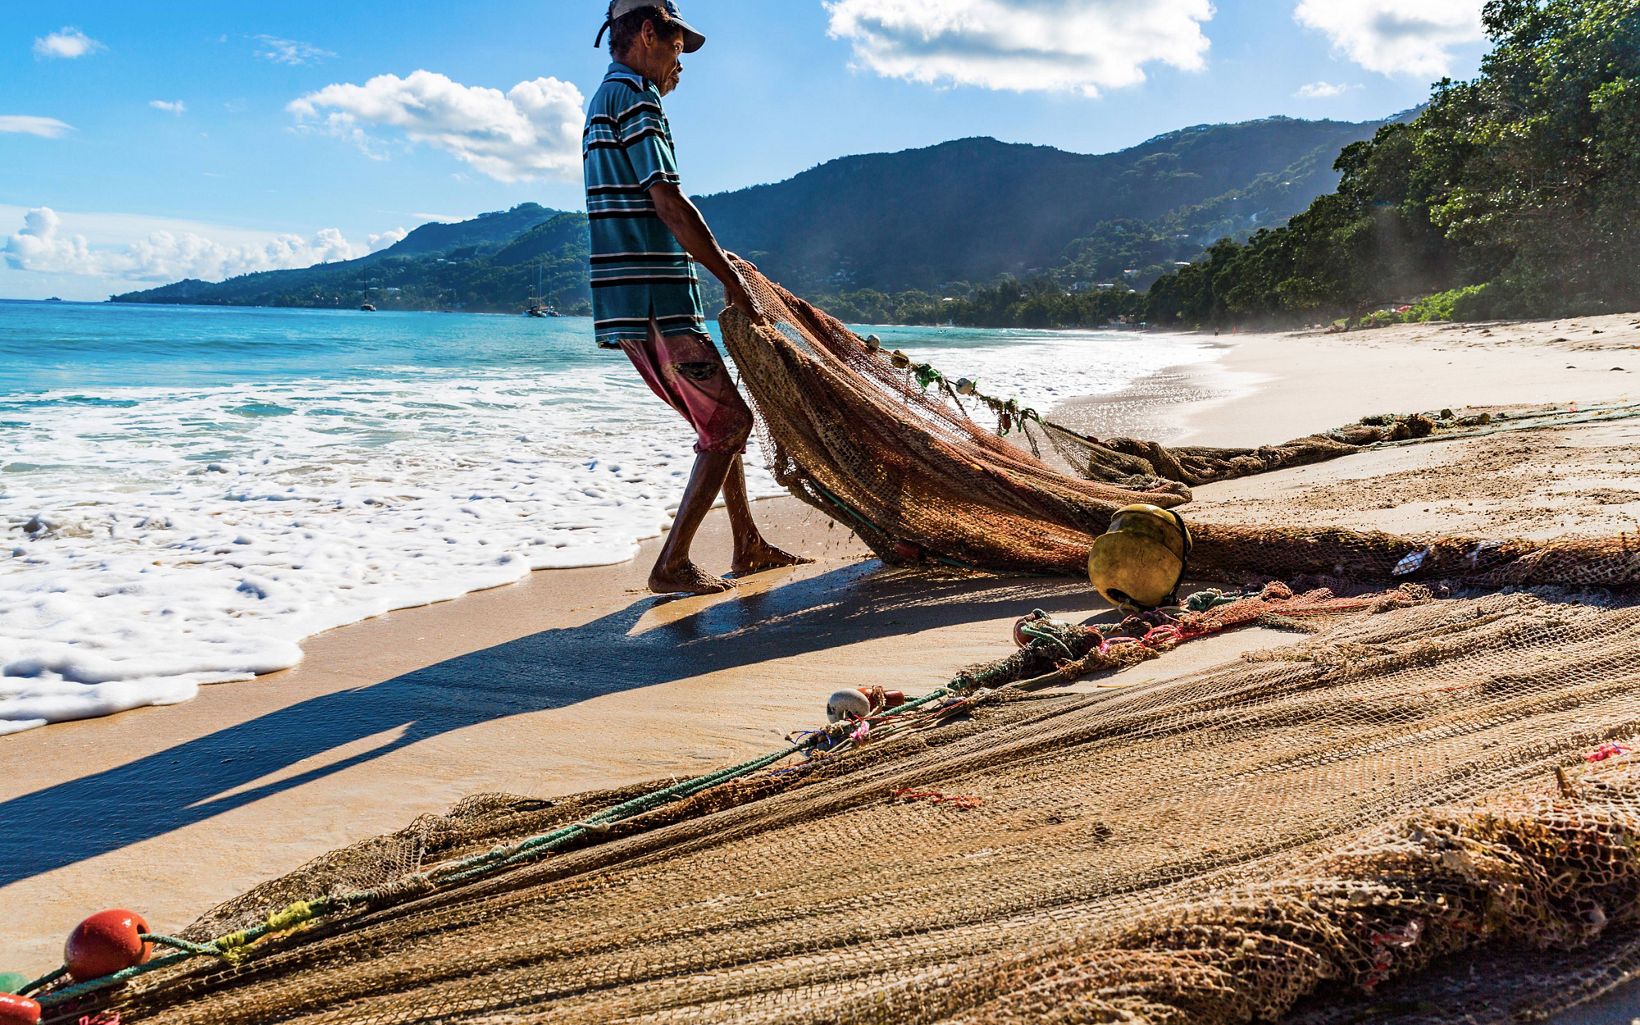 Mackrel fishermen fish along the shore with small boats and seine nets, trapping fish against the beach and hauling the catch up onto the sand, Seychelles.